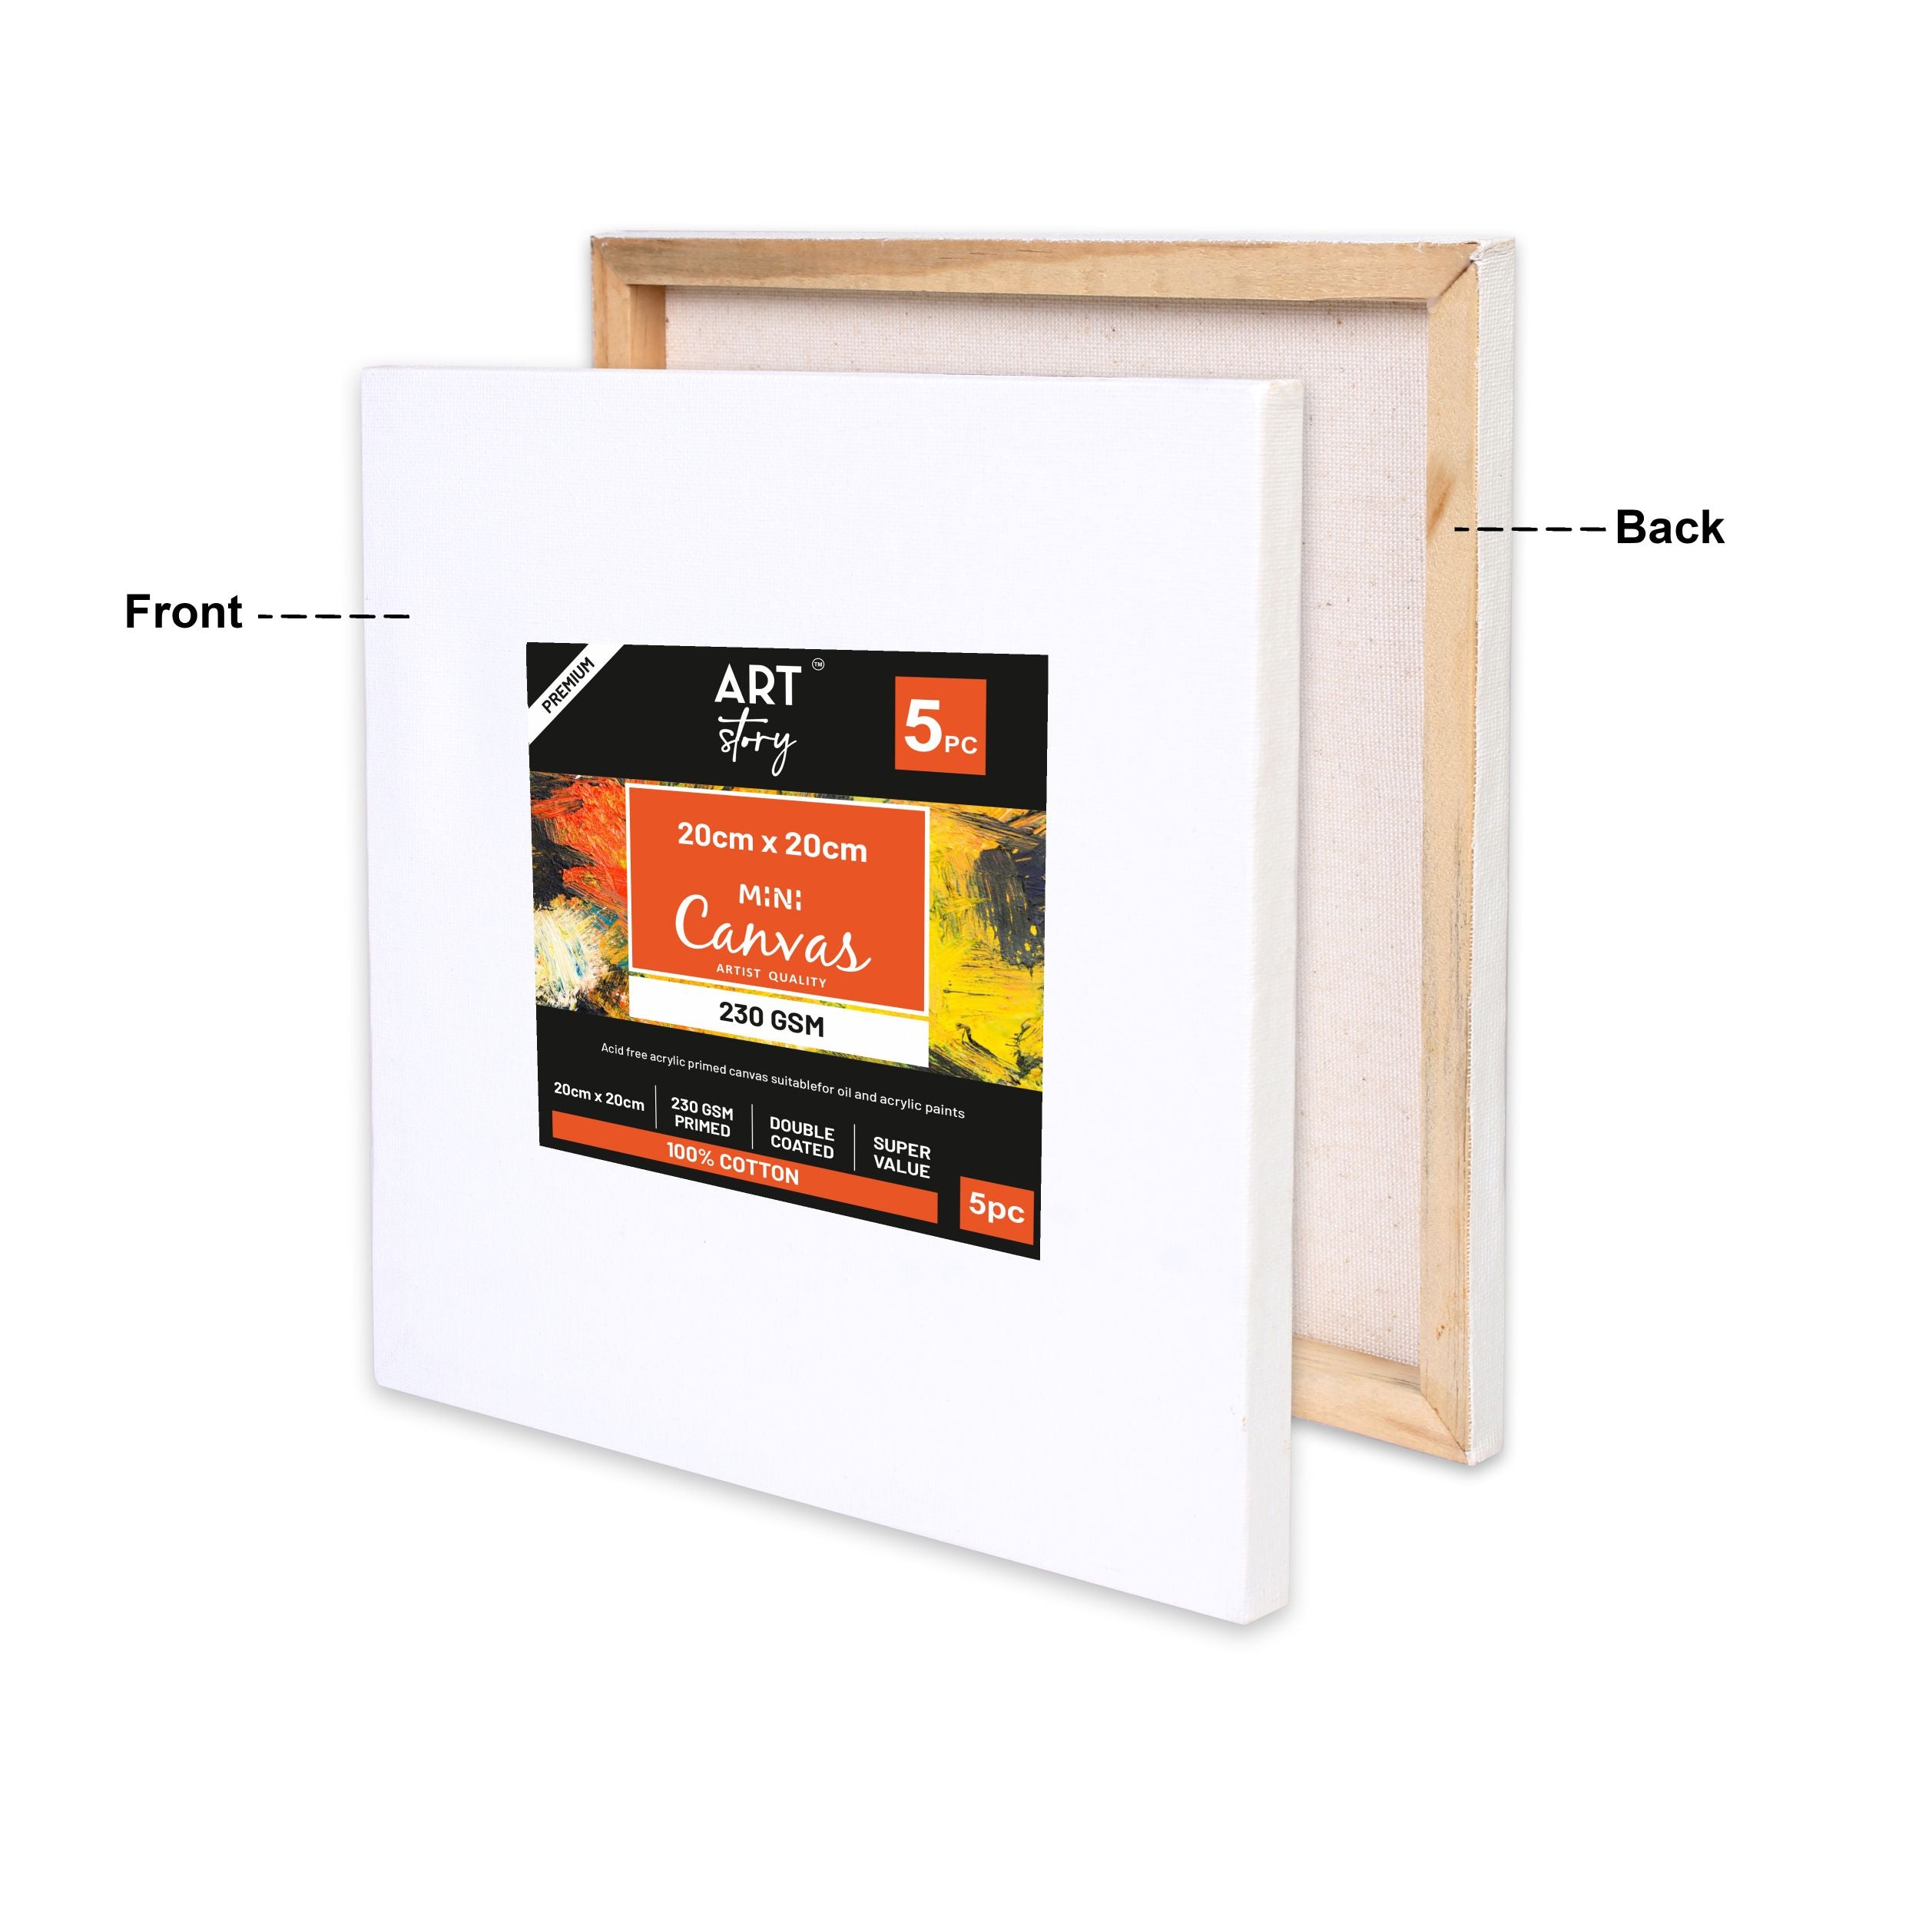 Mini Canvas 20 X 20Cm Pack Of 5Pc Shrink As